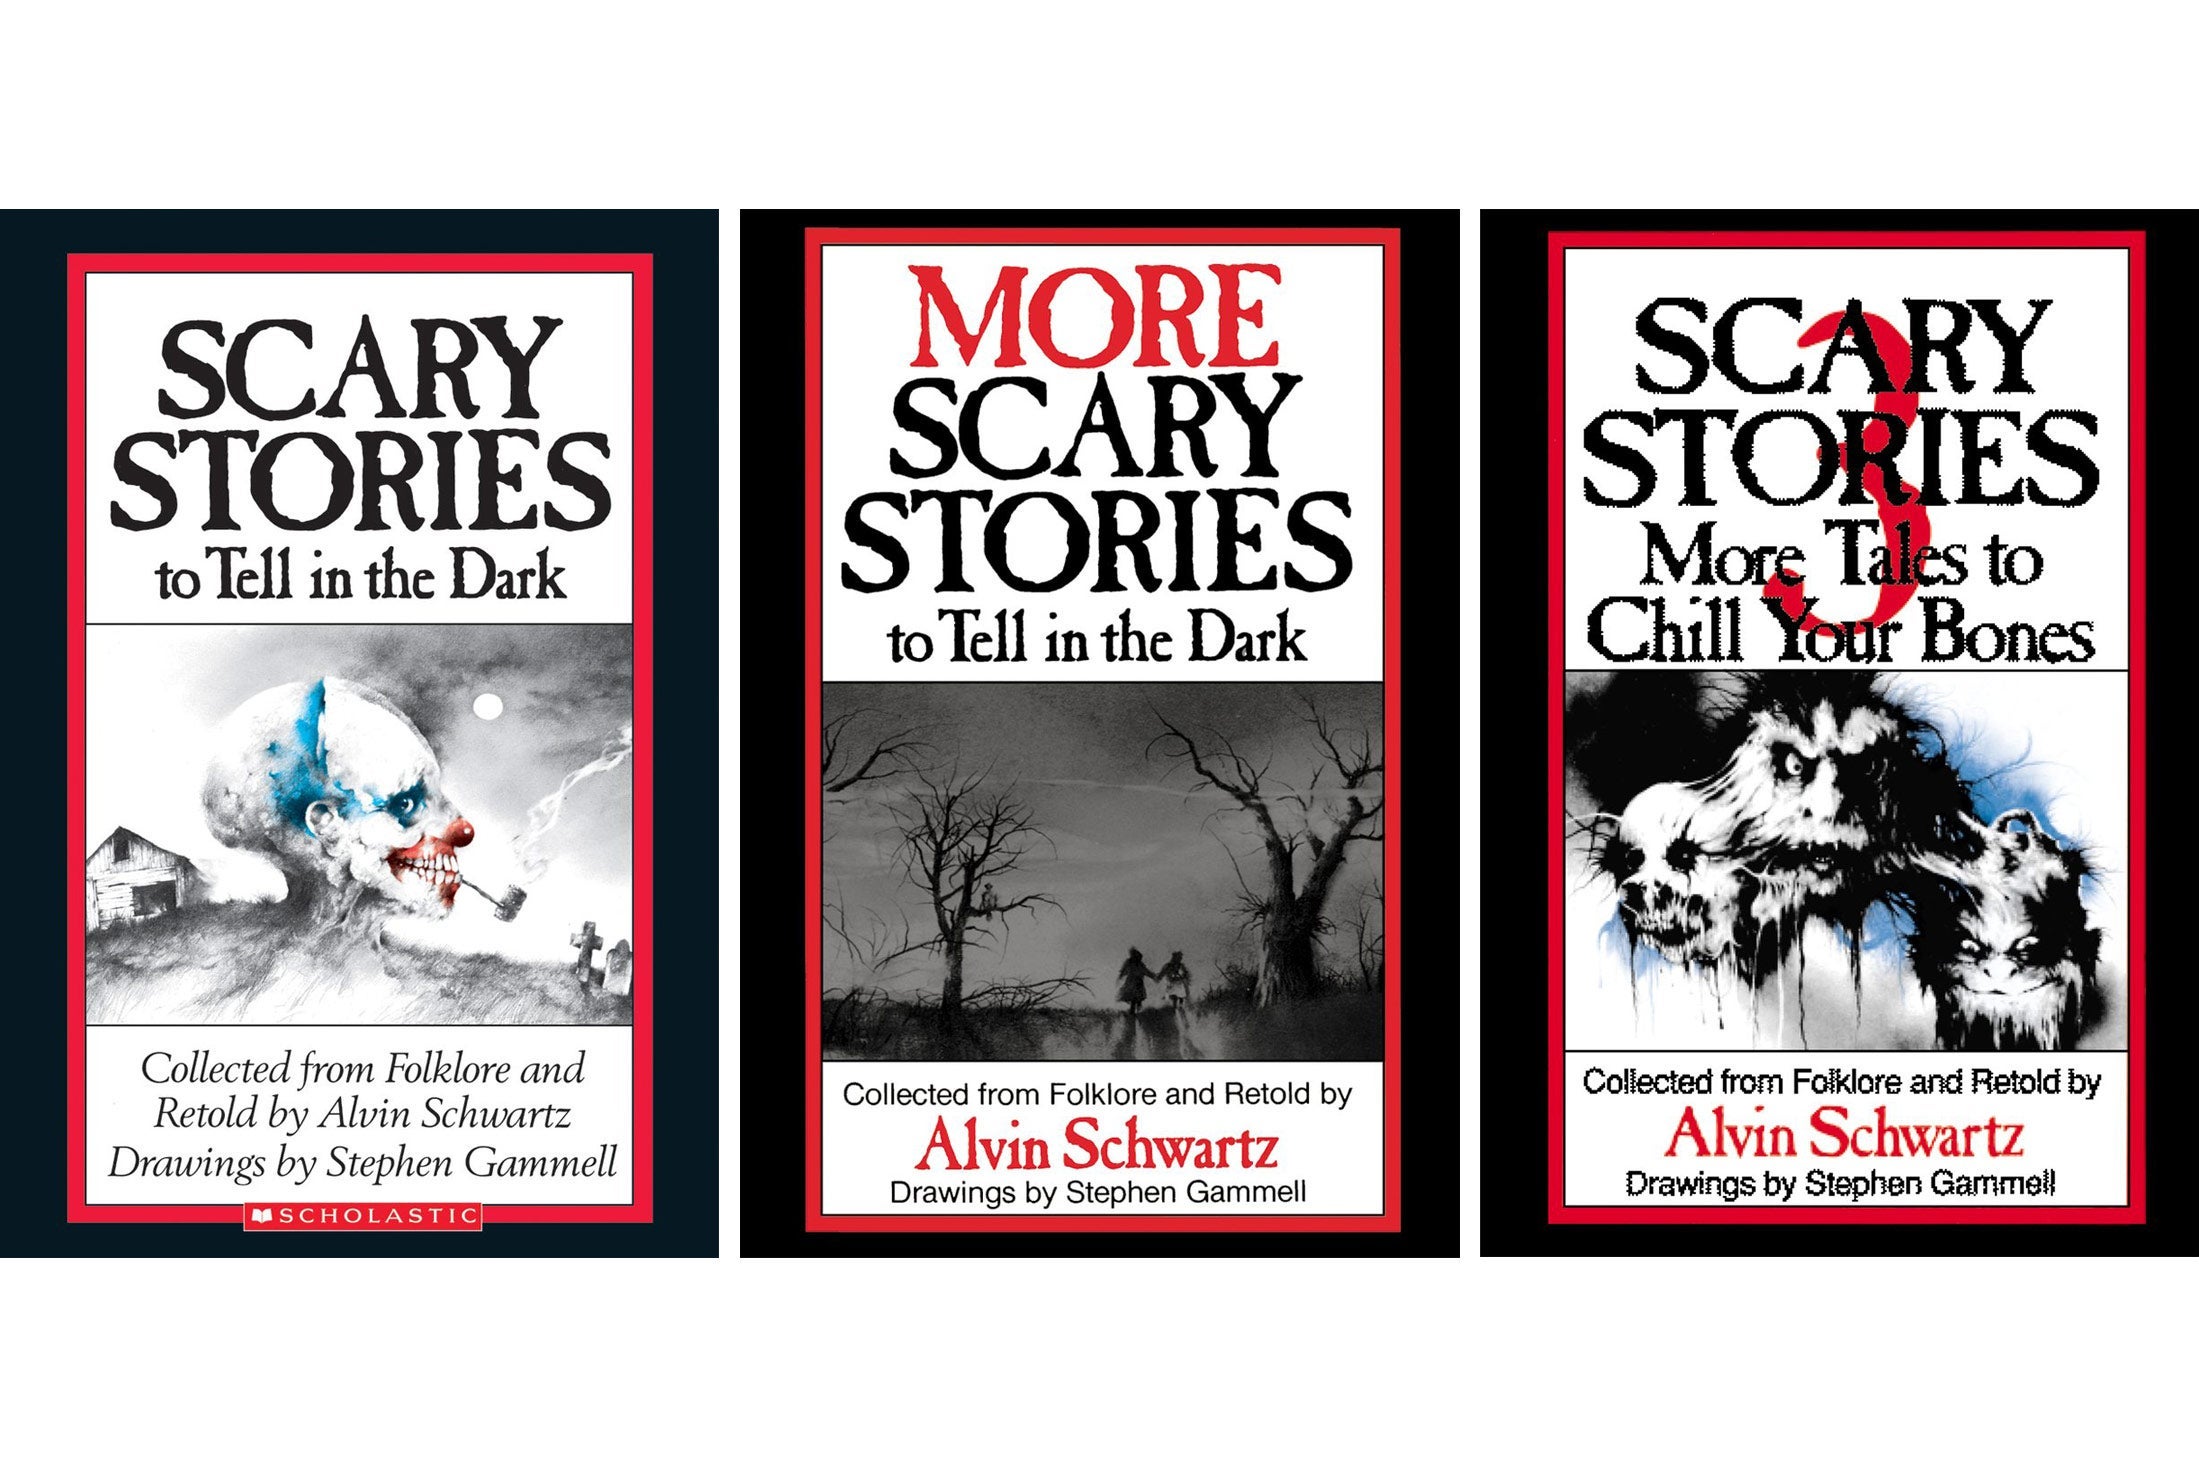 Scary Stories book covers